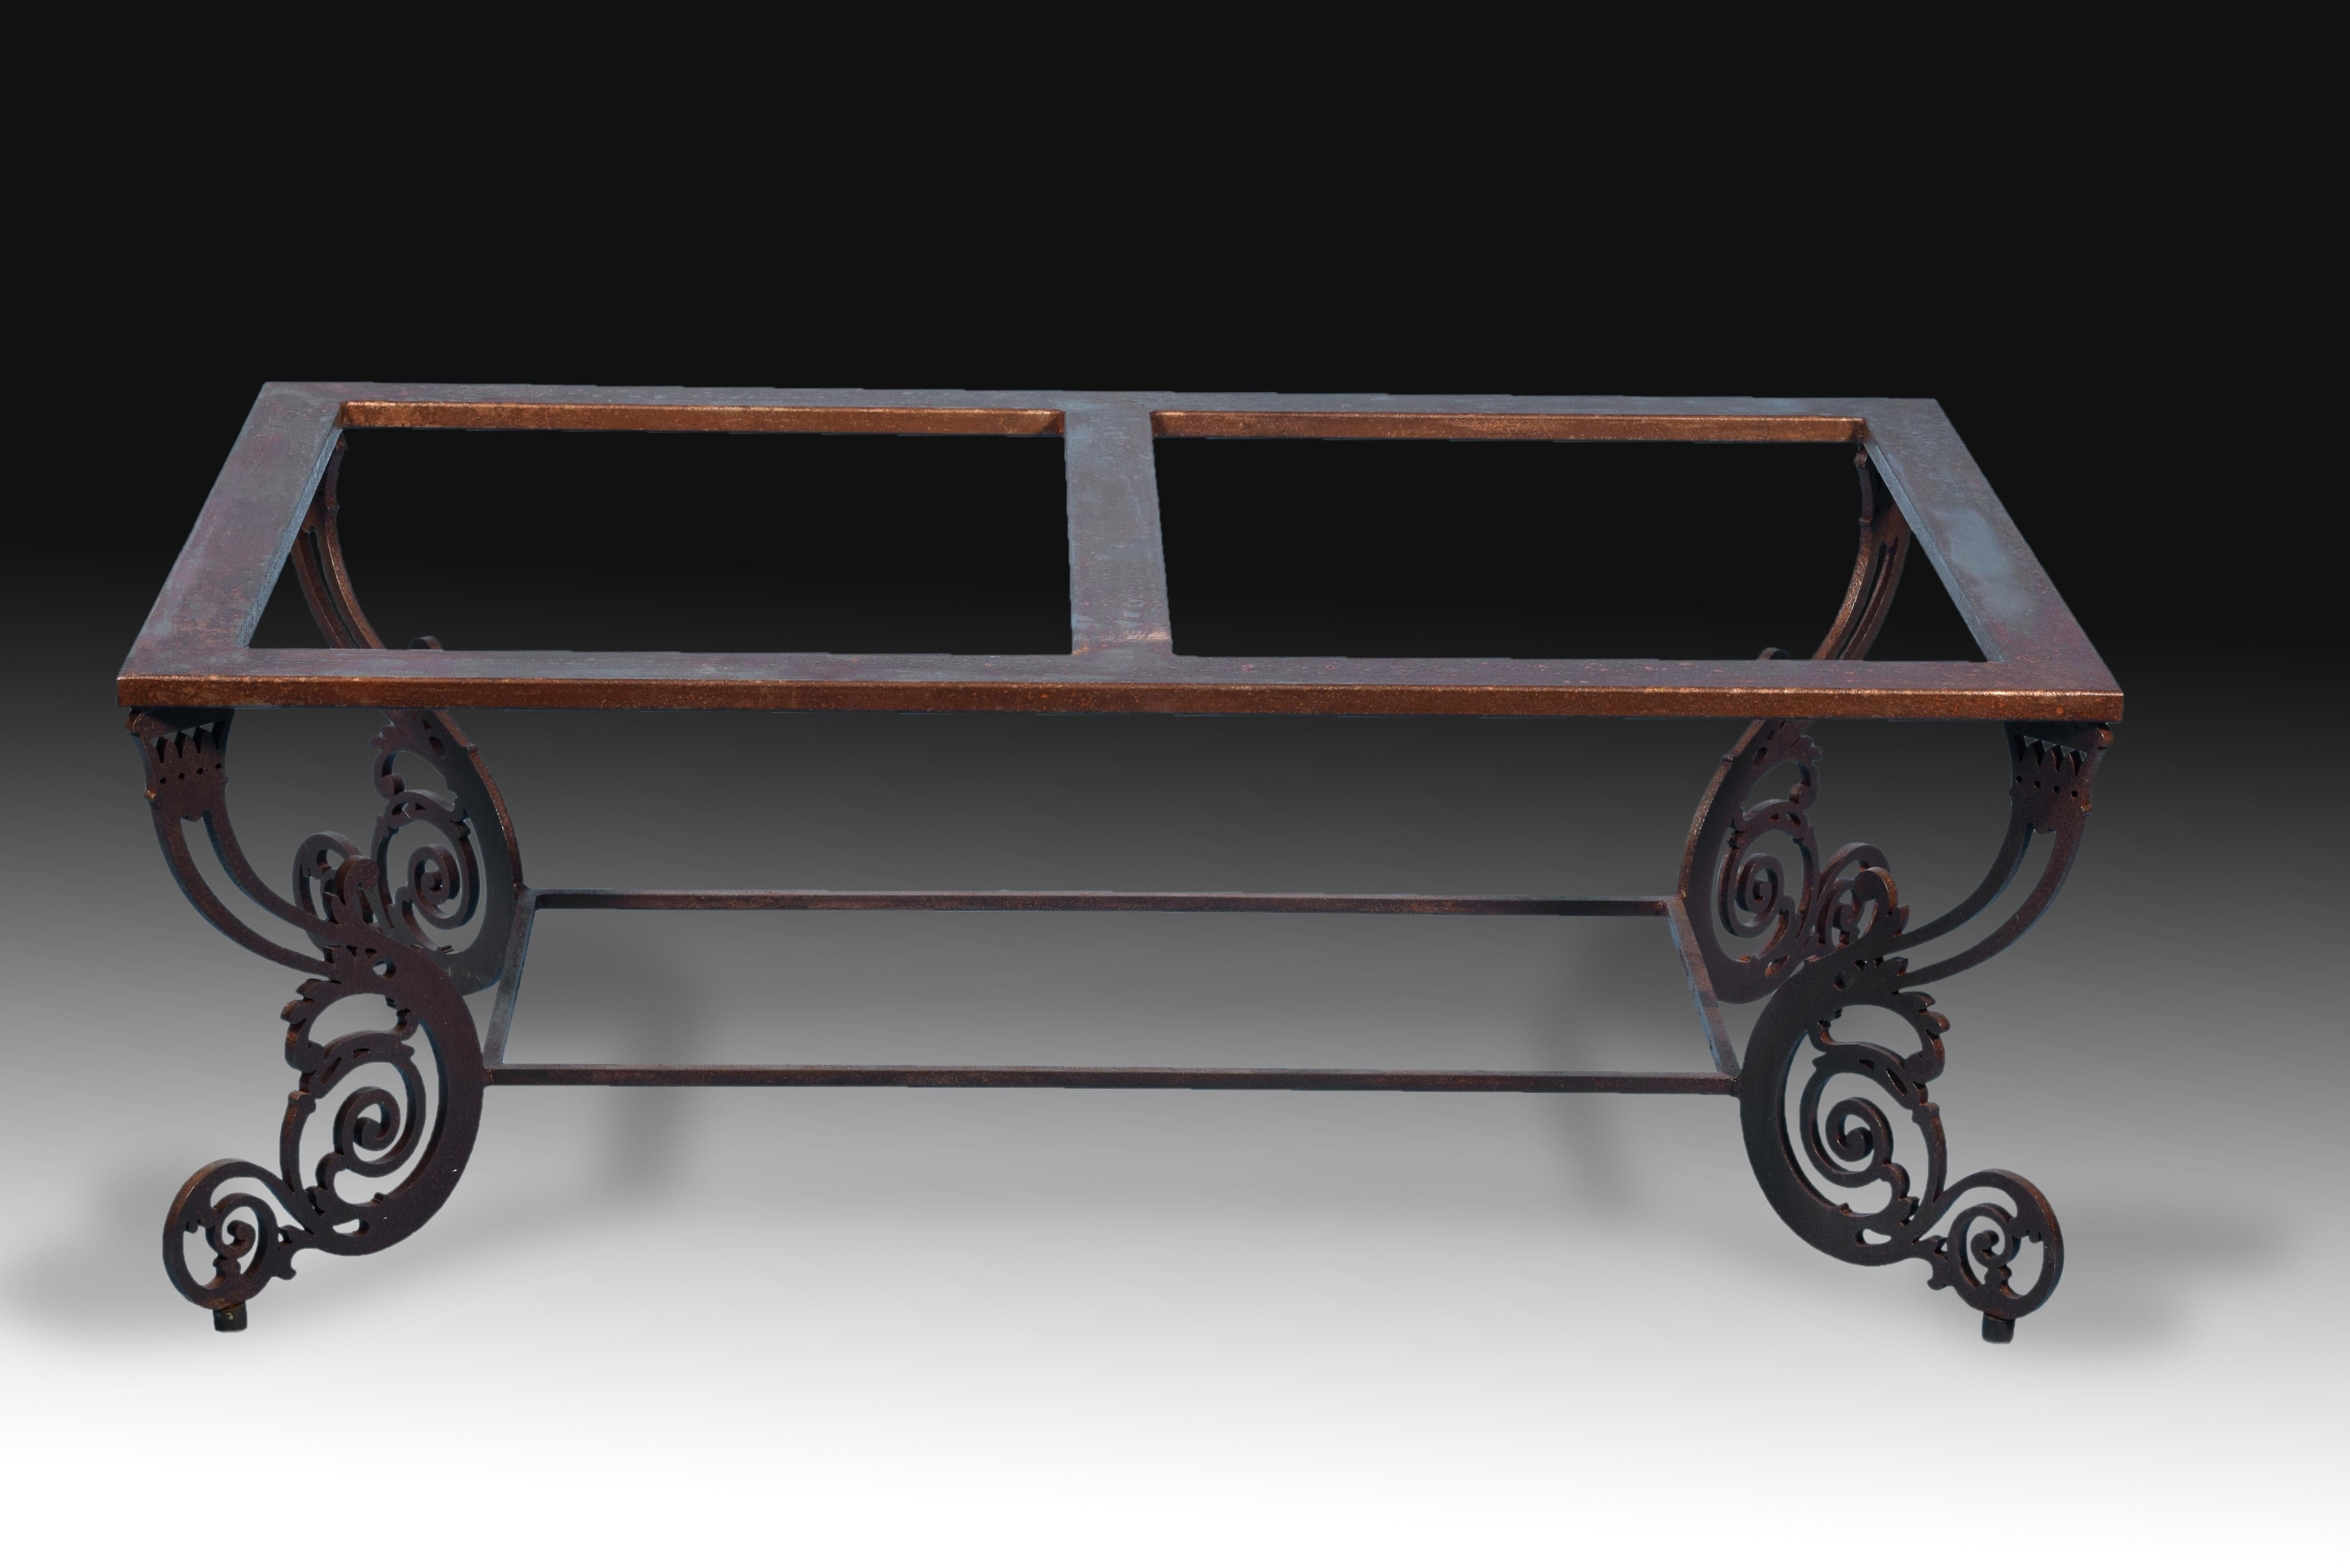 Iron base with antique finish for table.
Rectangular base for low table made of iron with an antique finish that features flat openwork legs decorated with scrolls and plant elements of Neoclassicist influence, similar to 19th century European